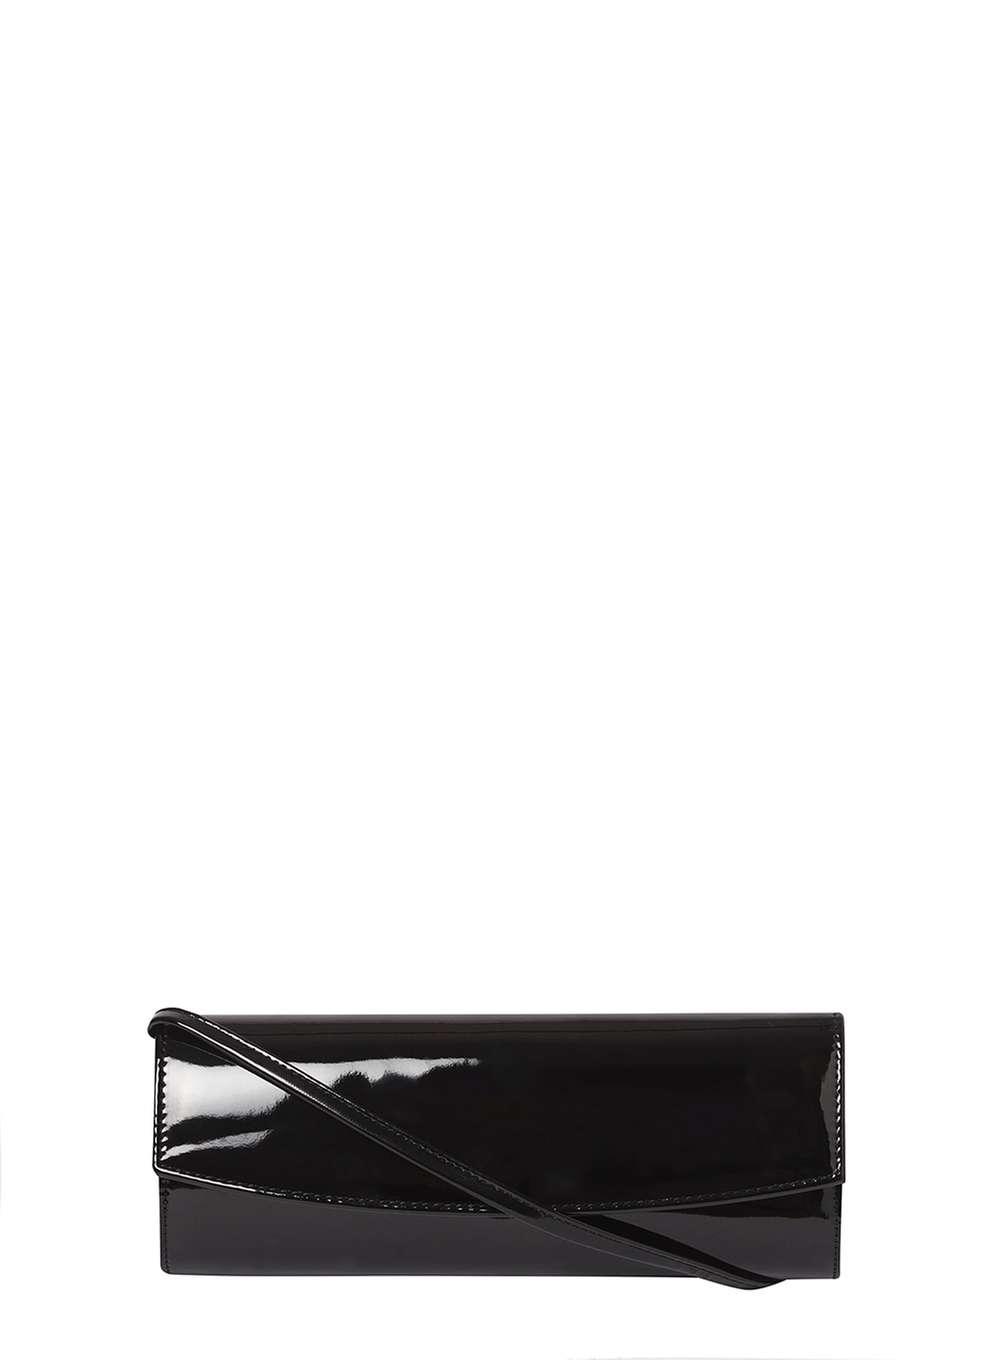 Dorothy Perkins Black Patent Structured Clutch in Black - Lyst